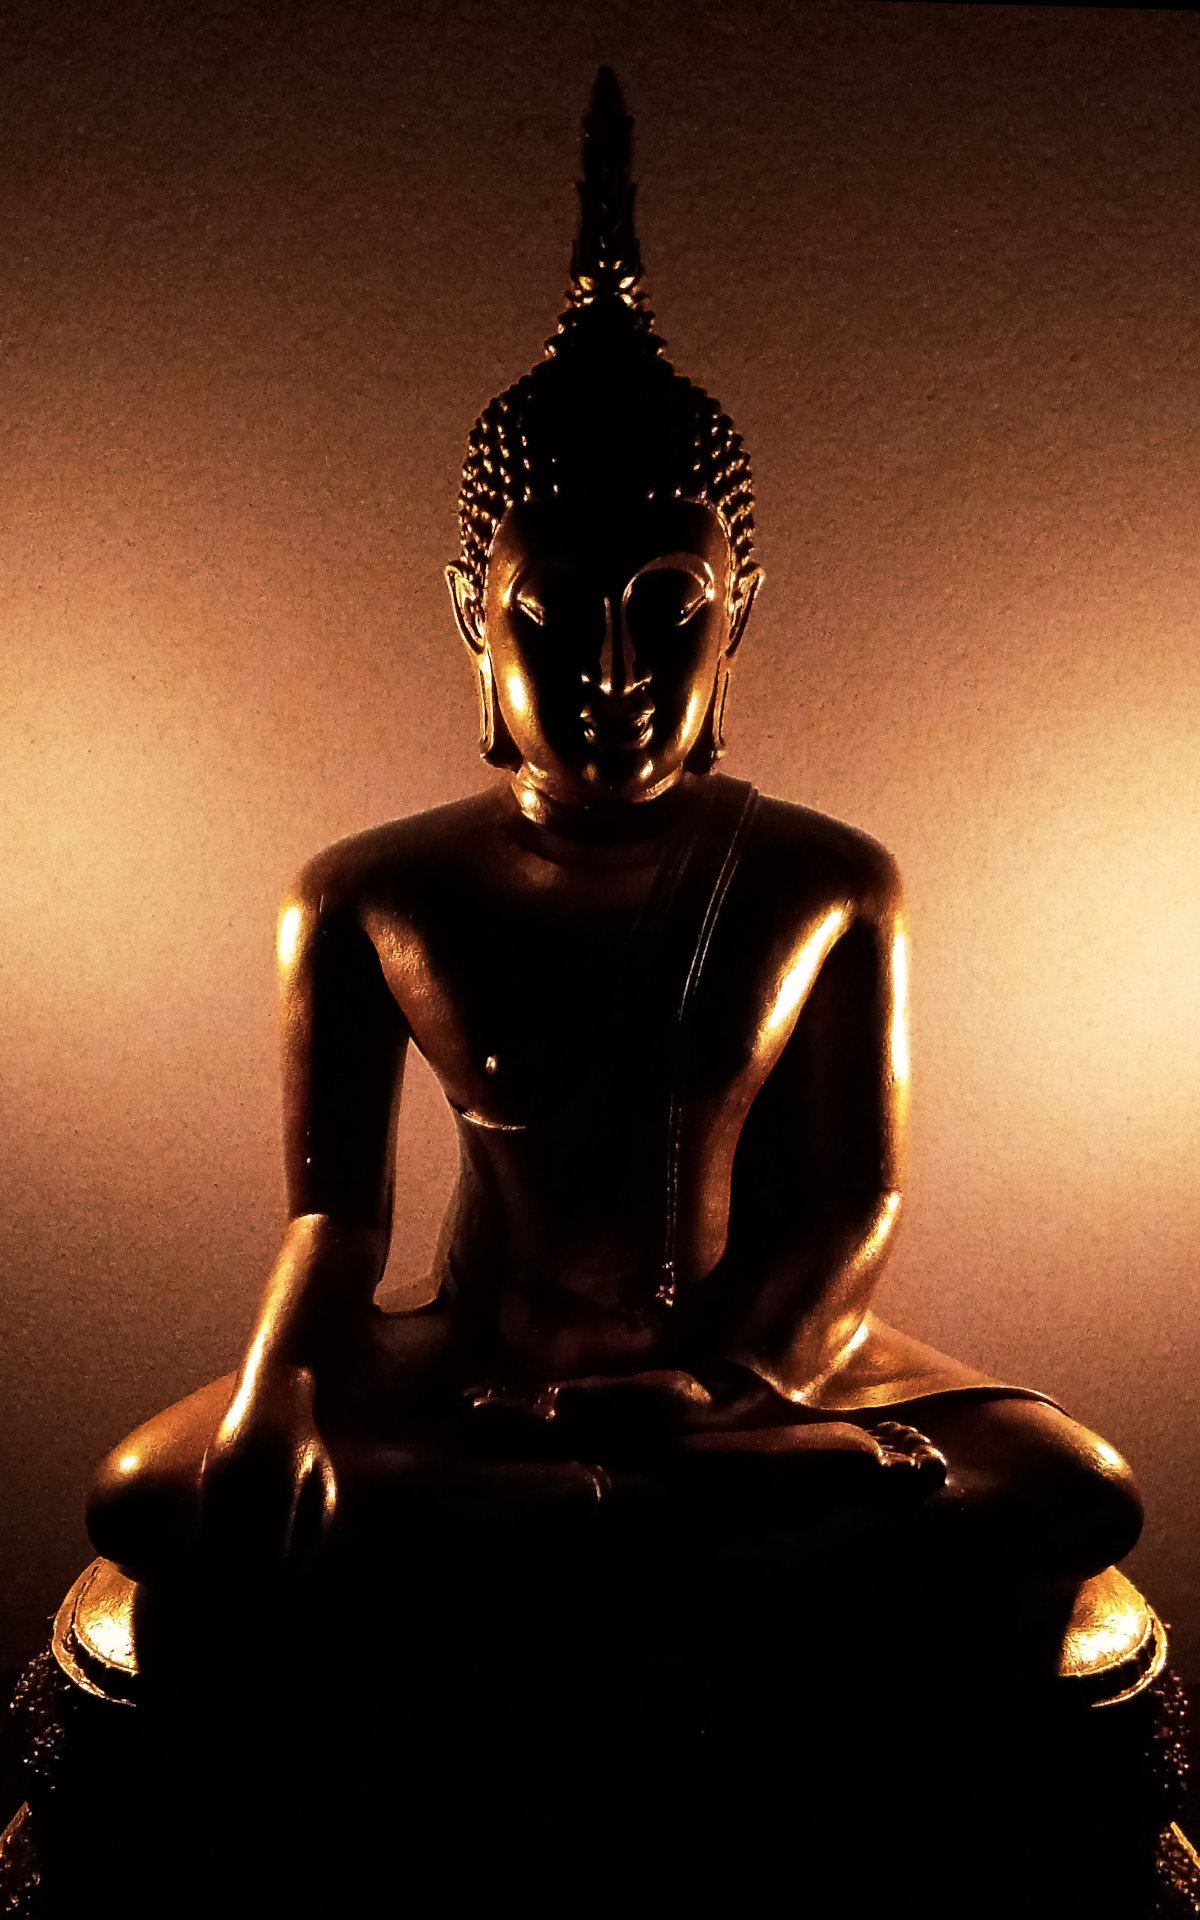 A Buddha image in candle light